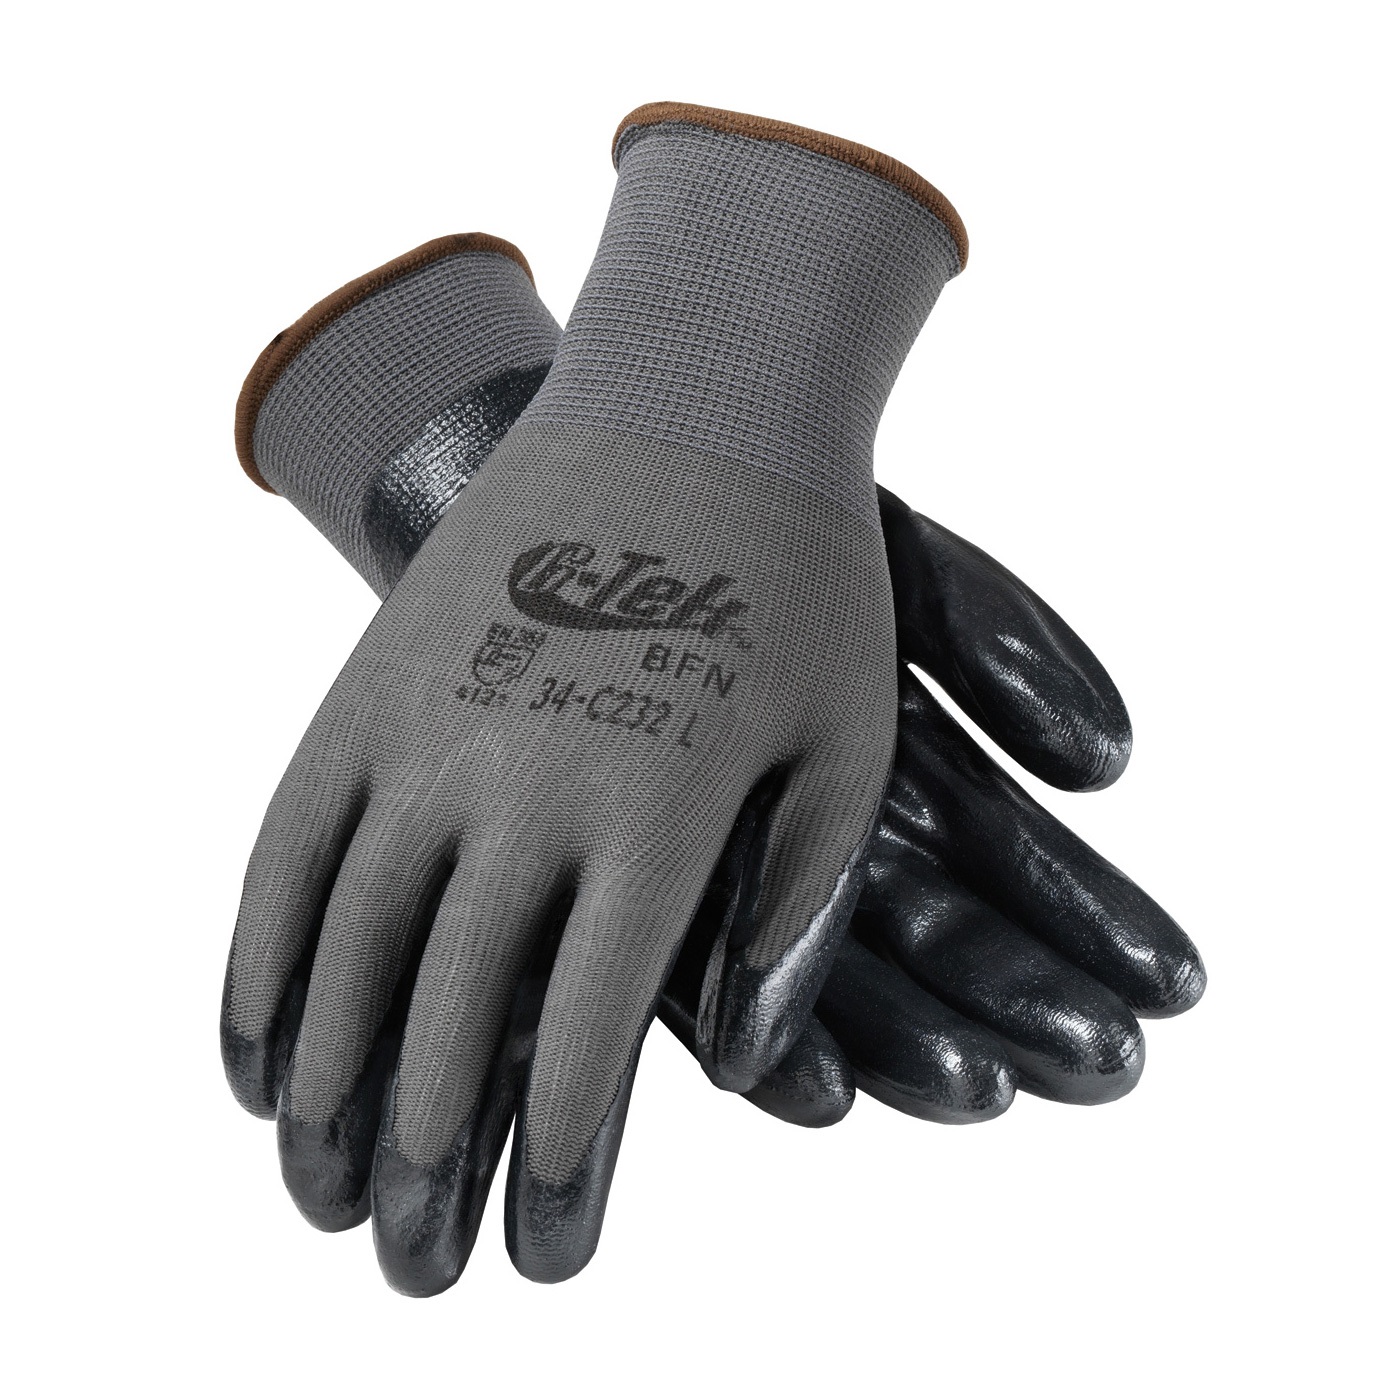 PIP 34-C232/S G-Tek GP Seamless Knit Nylon Glove with Nitrile Coated Foam Grip on Palm & Fingers - Economy Grade - Small PID-34 C232 S